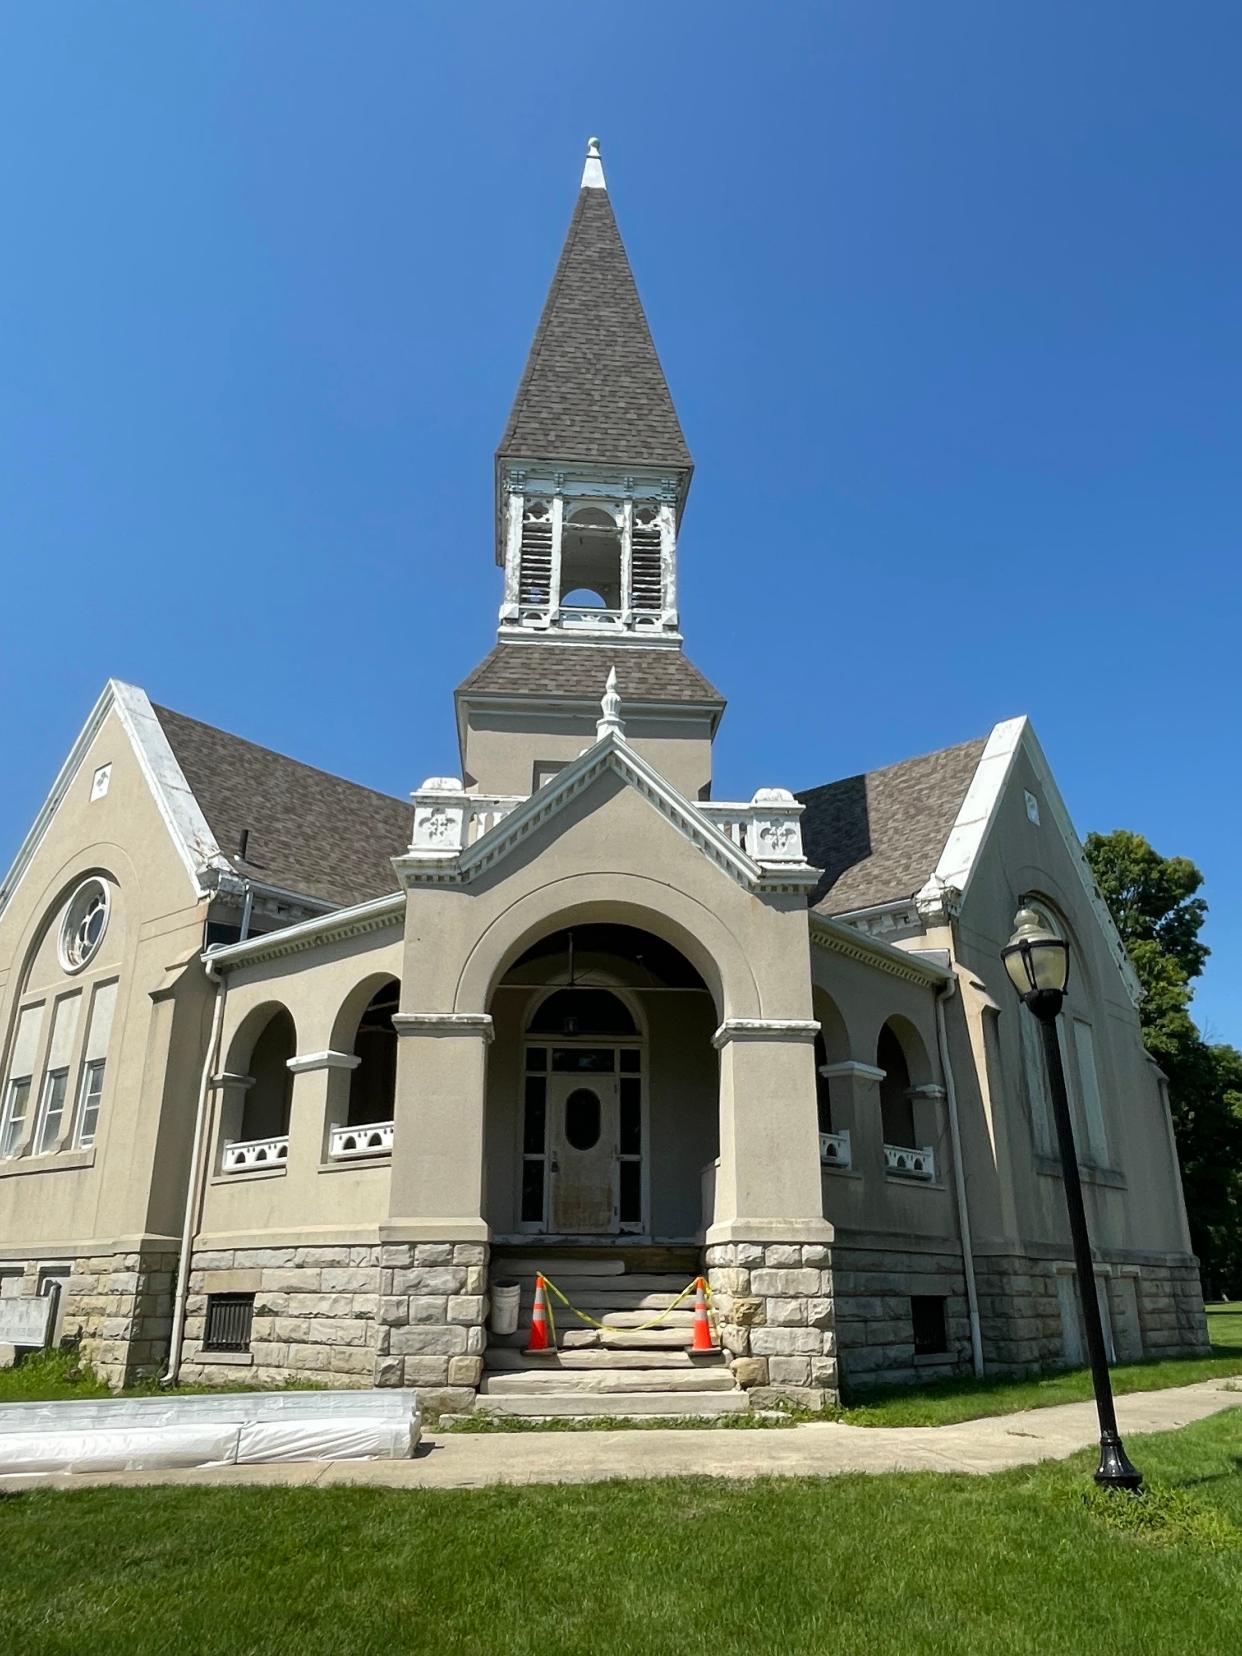 The former chapel on the former Adrian Training School campus is pictured. Renamed Haviland Hall, the building is undergoing renovations by the River Raisin Ragtime Revue, which has raised at least $150,000 for phase one of the project, consisting of exterior renovations, including a $60,000 grant from the Michigan Arts and Culture Council and funds from Adrian Kiwanis Club, Maurice and Dorothy Stubnitz Foundation, PlaneWave Instruments and other donors. R4 plans to raise $1 million through grants, crowdfunding and donations.